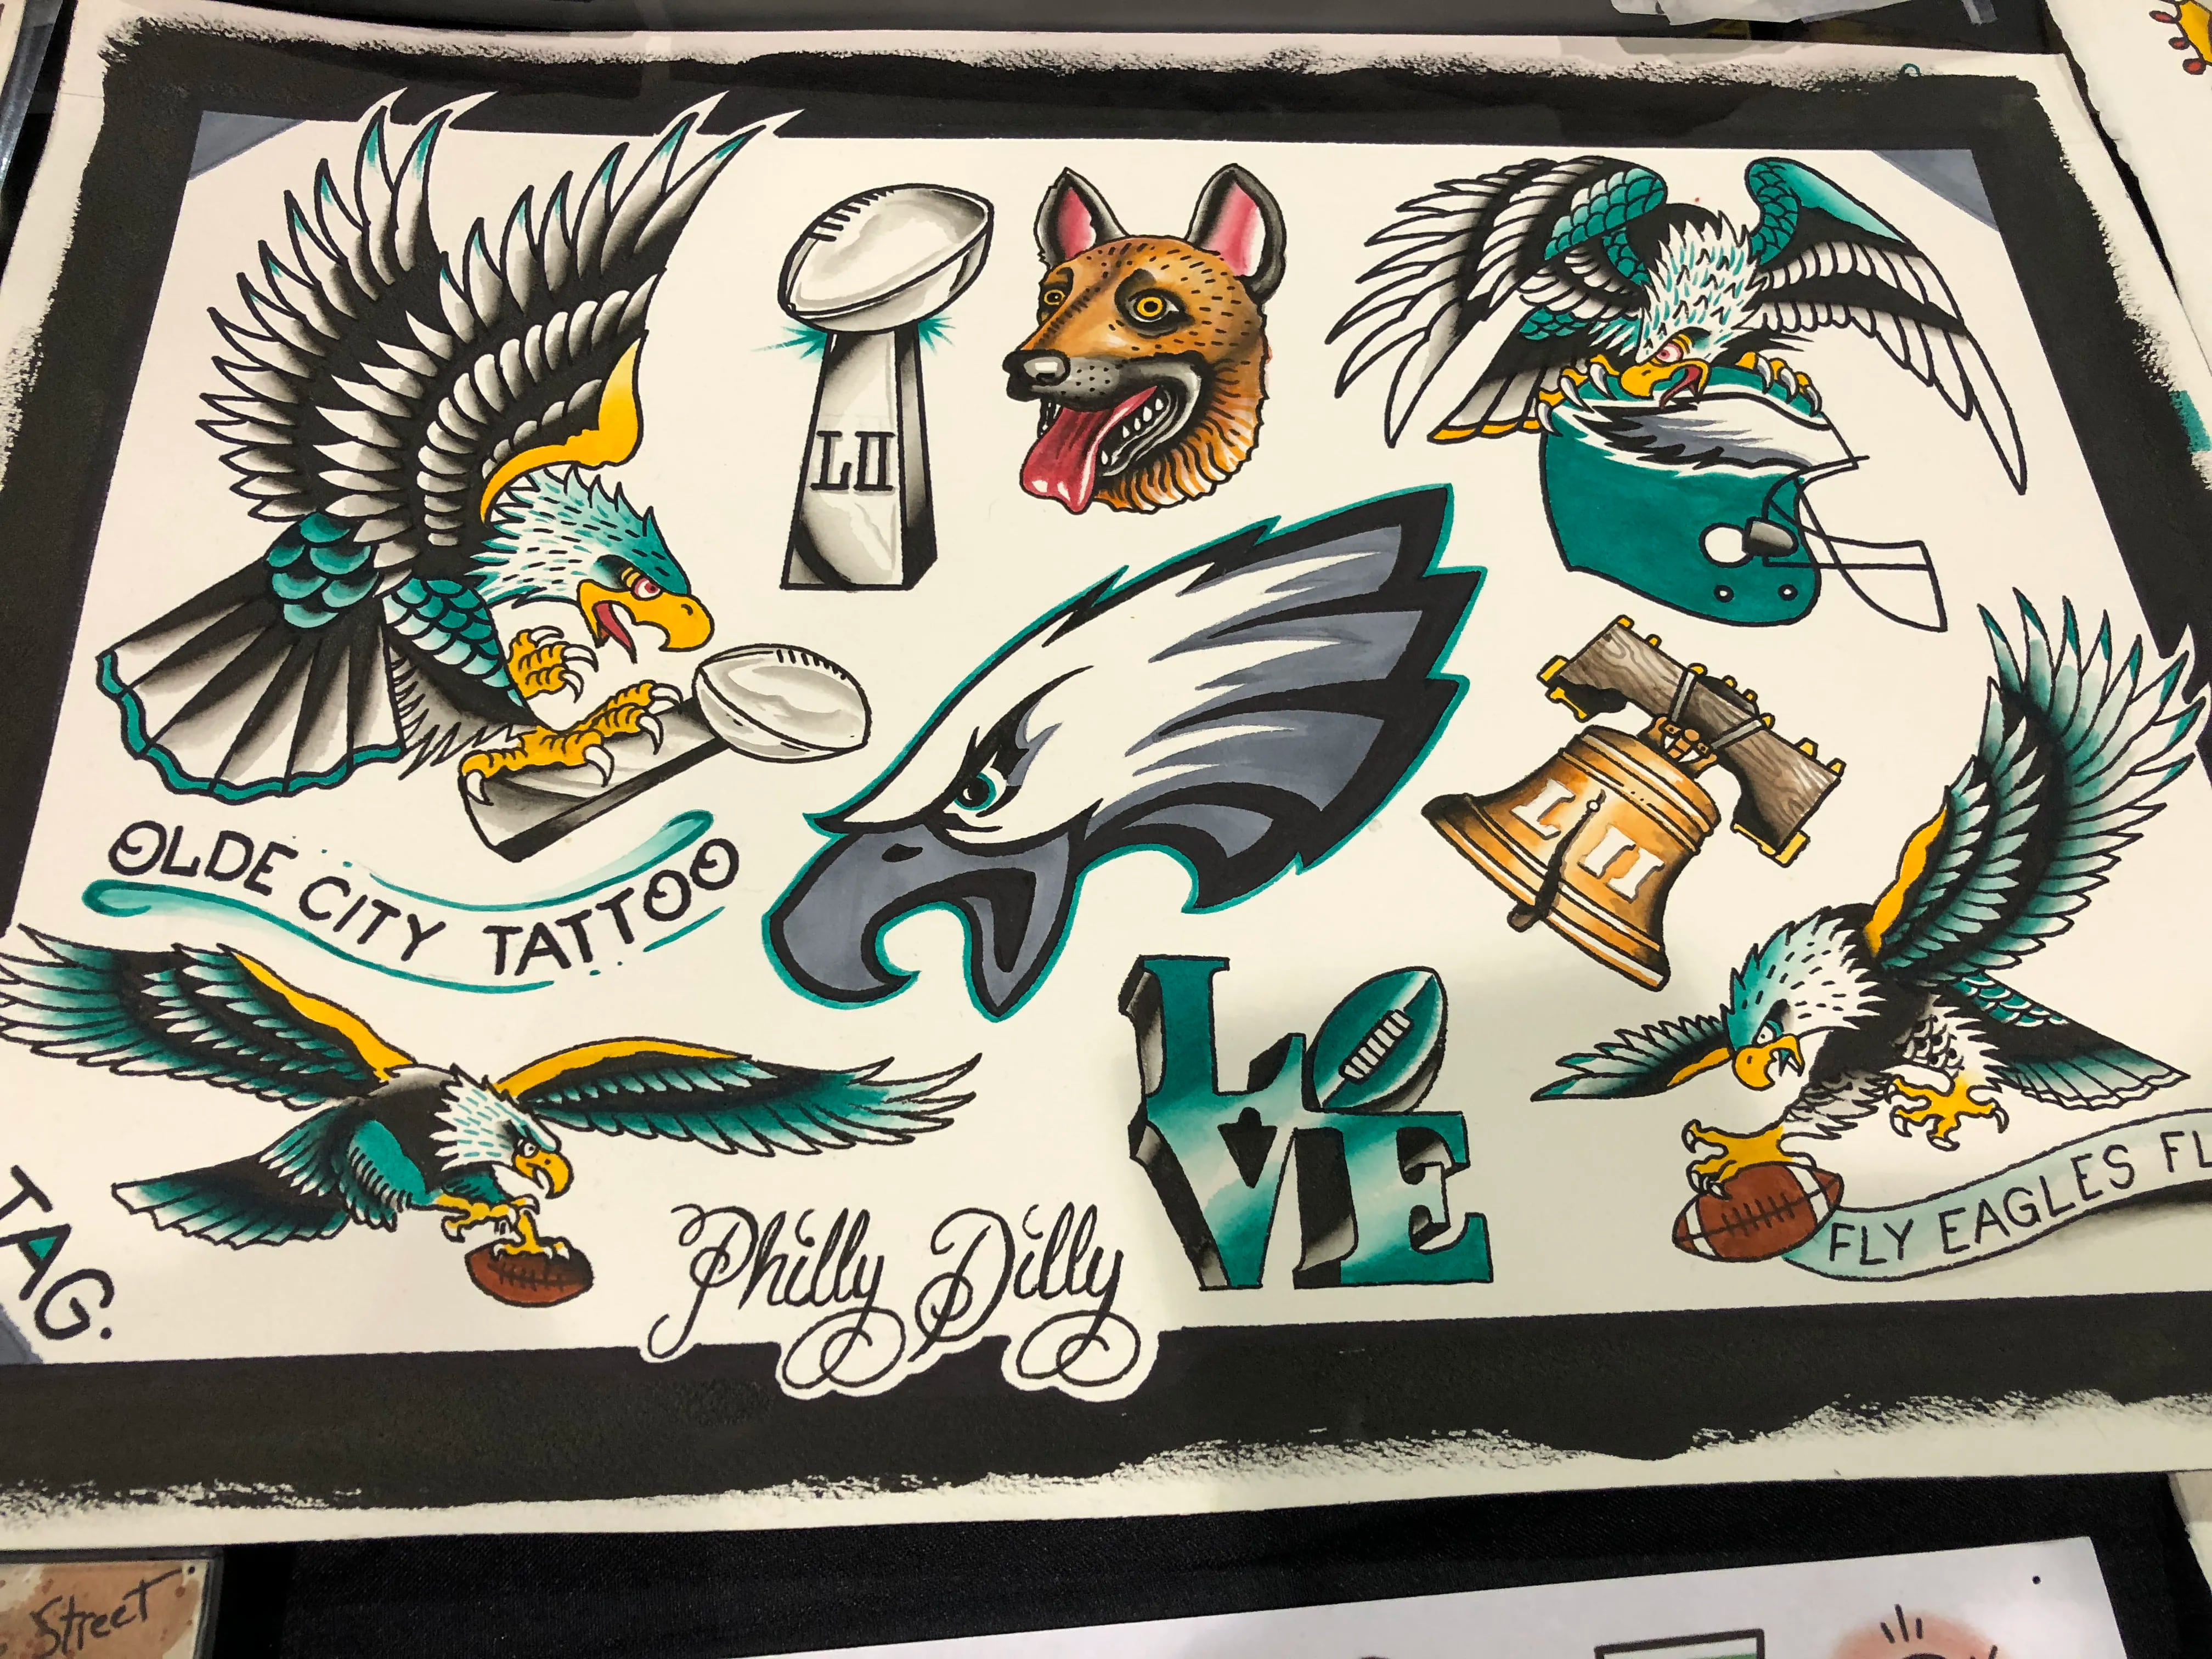 After Eagles Super Bowl parade, Jason Kelce and 'Philly Dilly